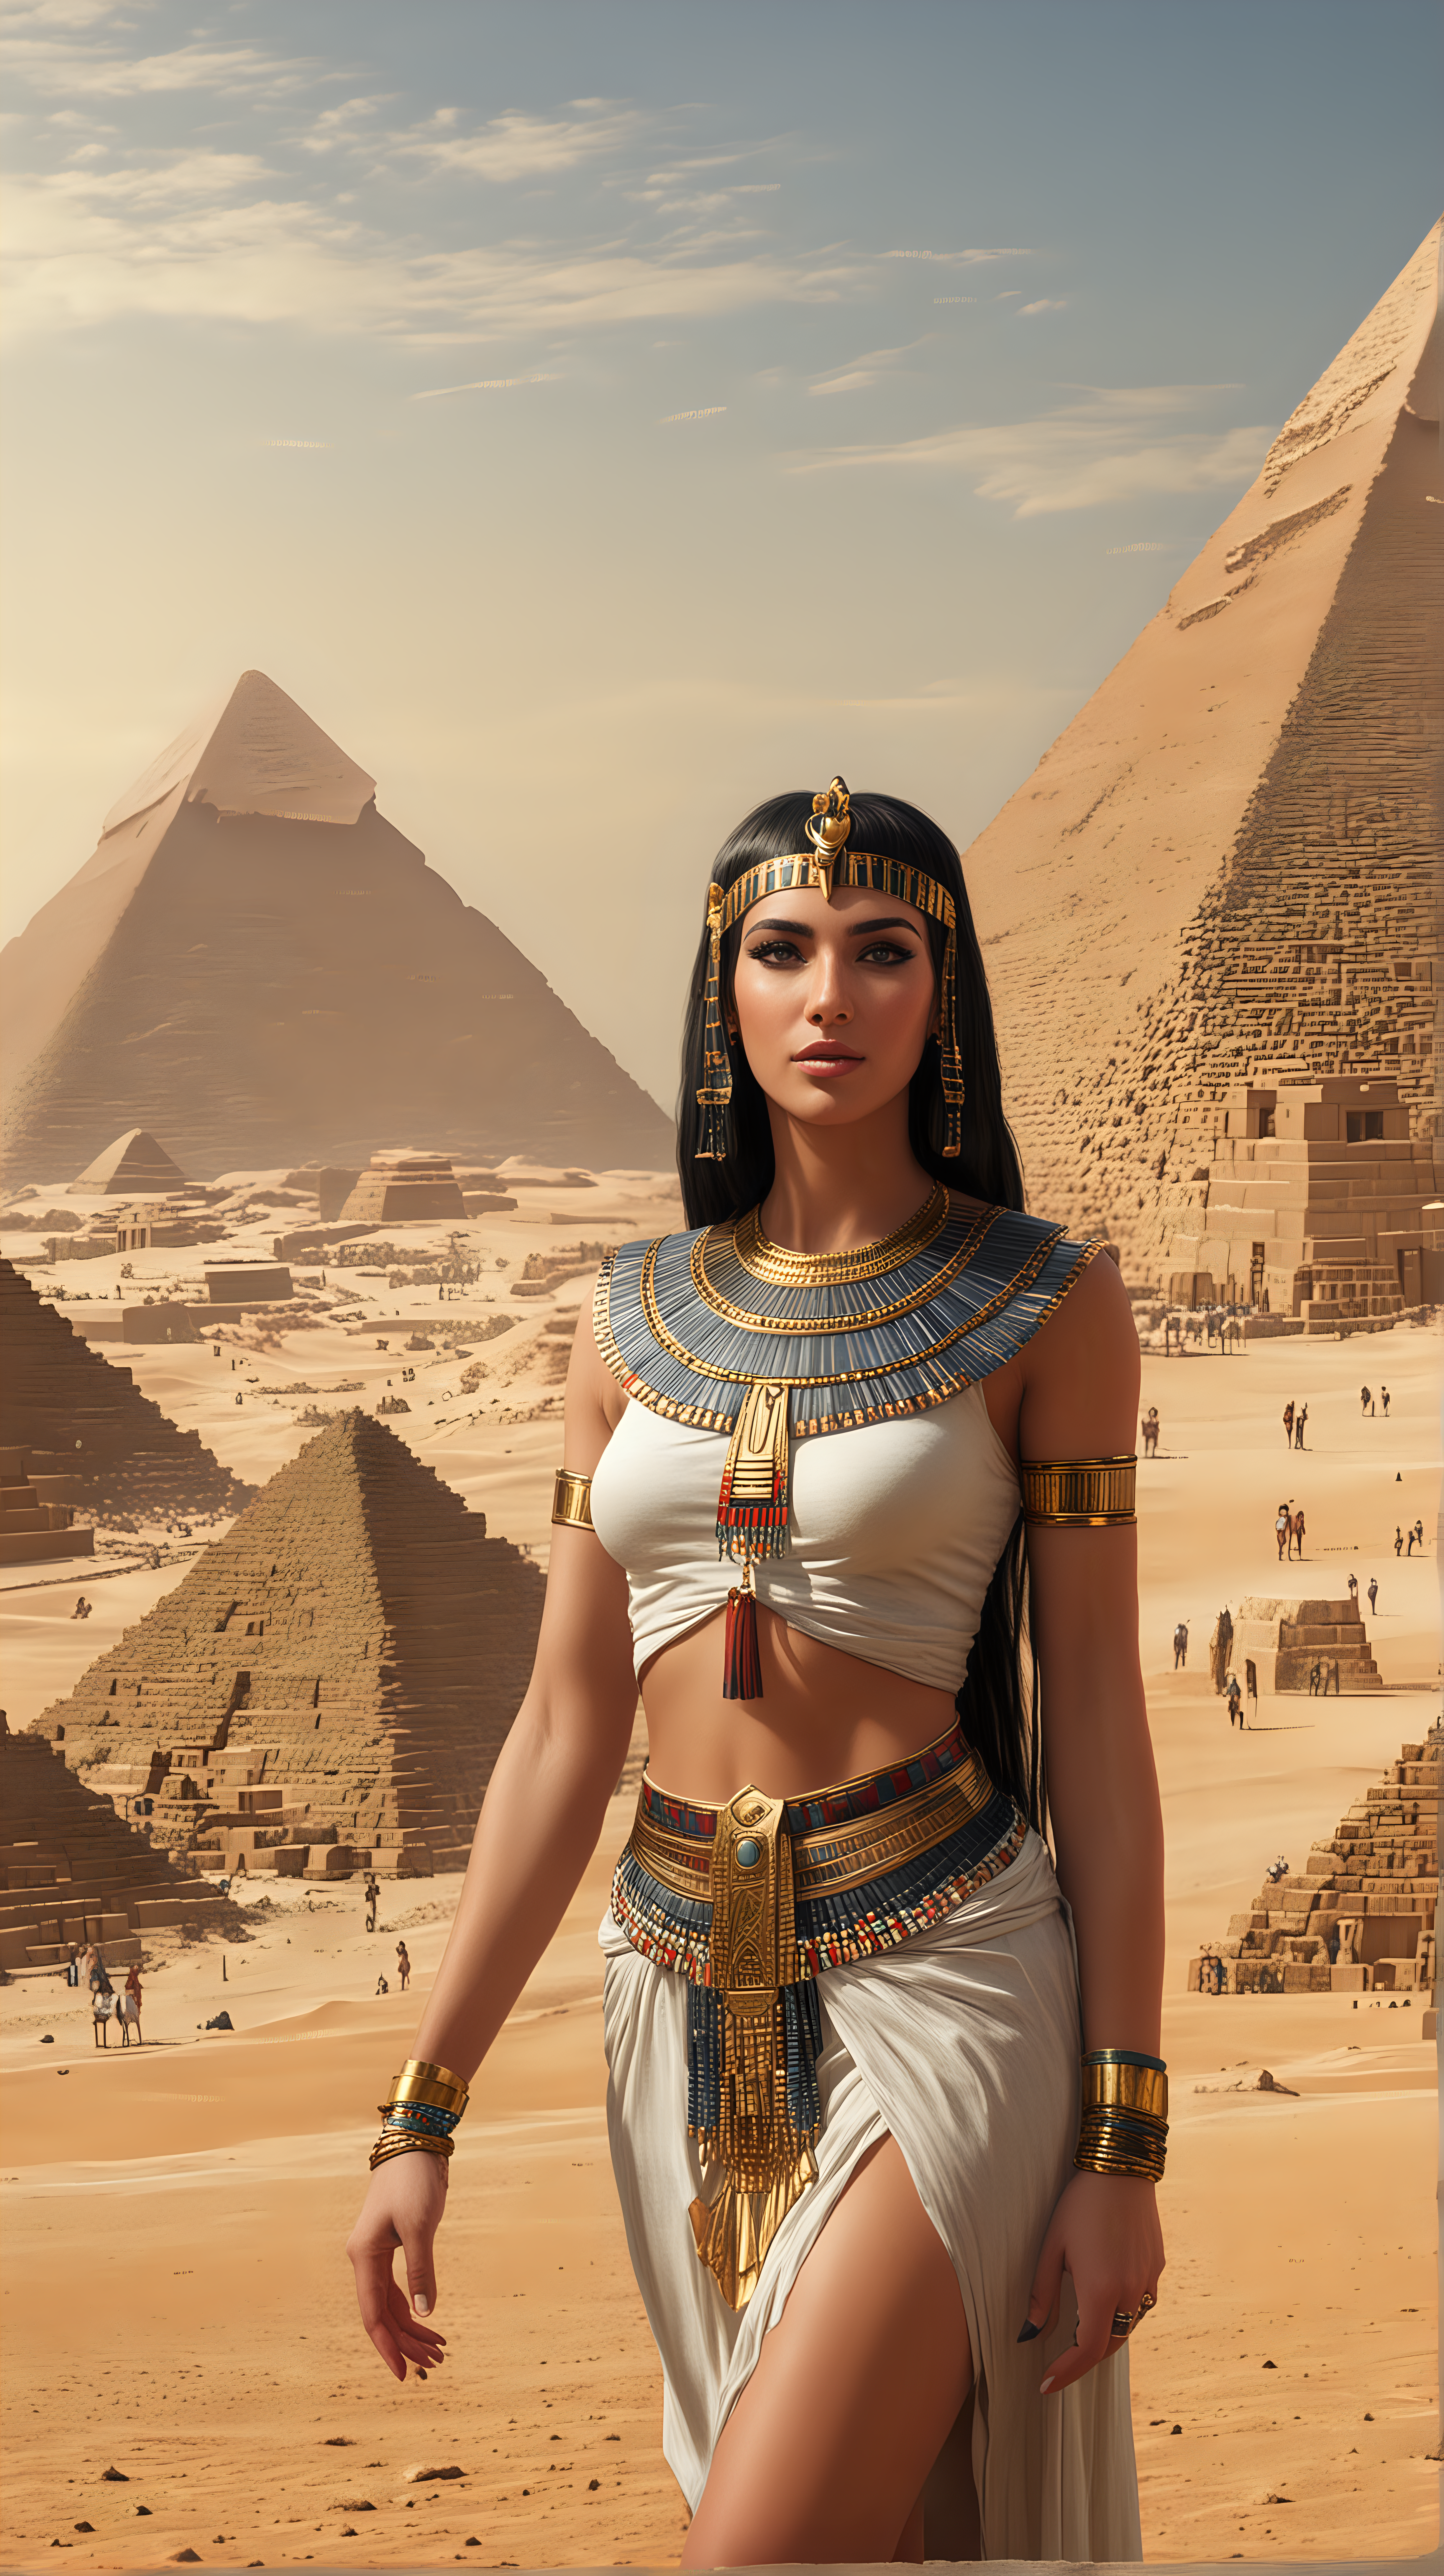 Cleopatra in background egypt pyramids .hyper realistic